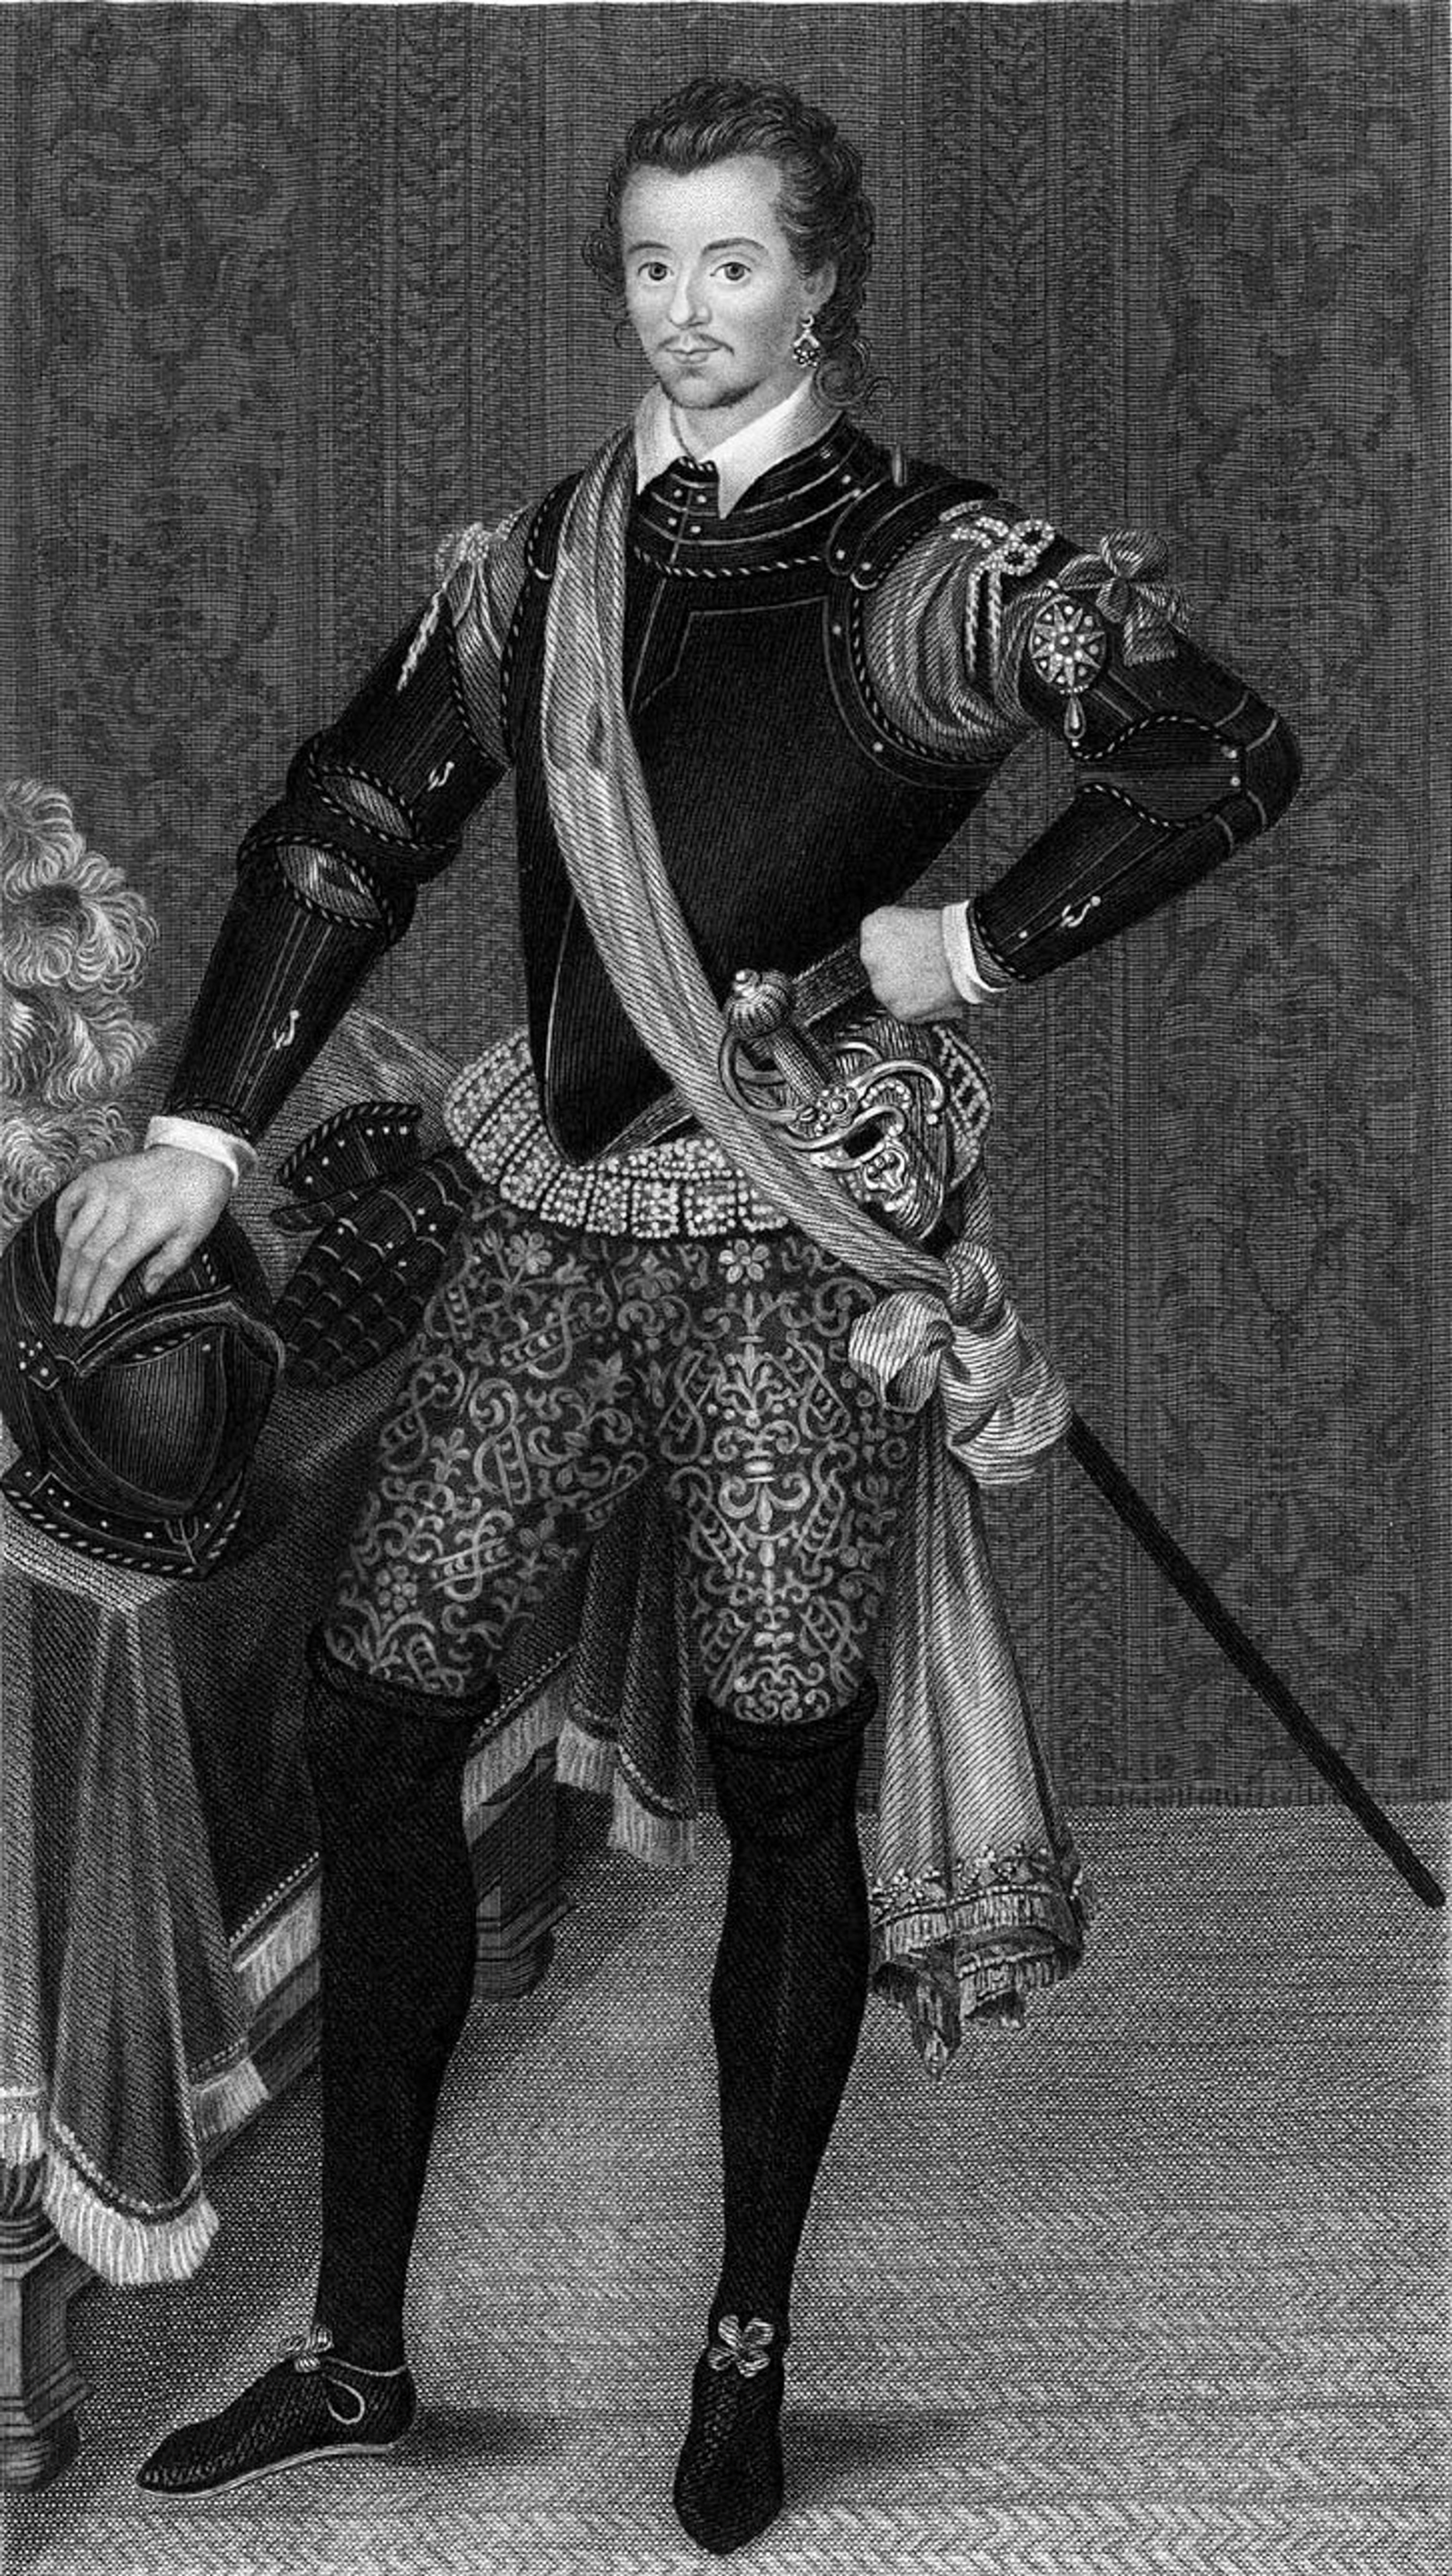 Full body black and white portrait of Robert Dudley, a man with dark short hair and is well dressed with a sword hanging from his left hip.